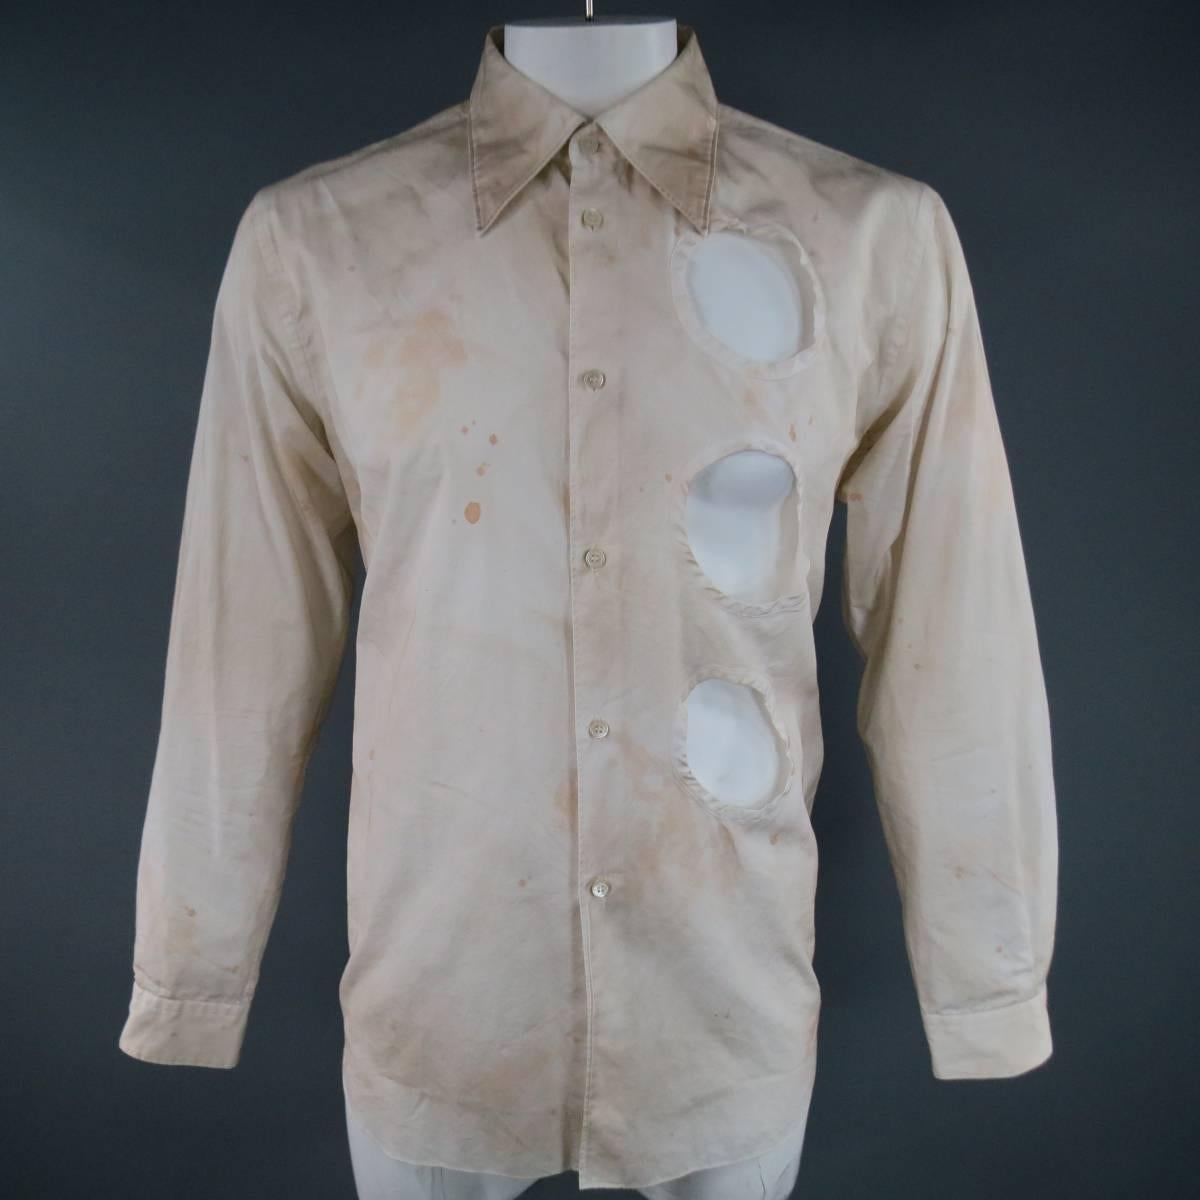 COMME des GARCONS Long Sleeve Shirt consists of cotton material in a beige color tone. Designed with a pointed collar, button-up front and cut-out hole detail on one side. Distressing can be seen throughout shirt. Single button cuffs. Made in